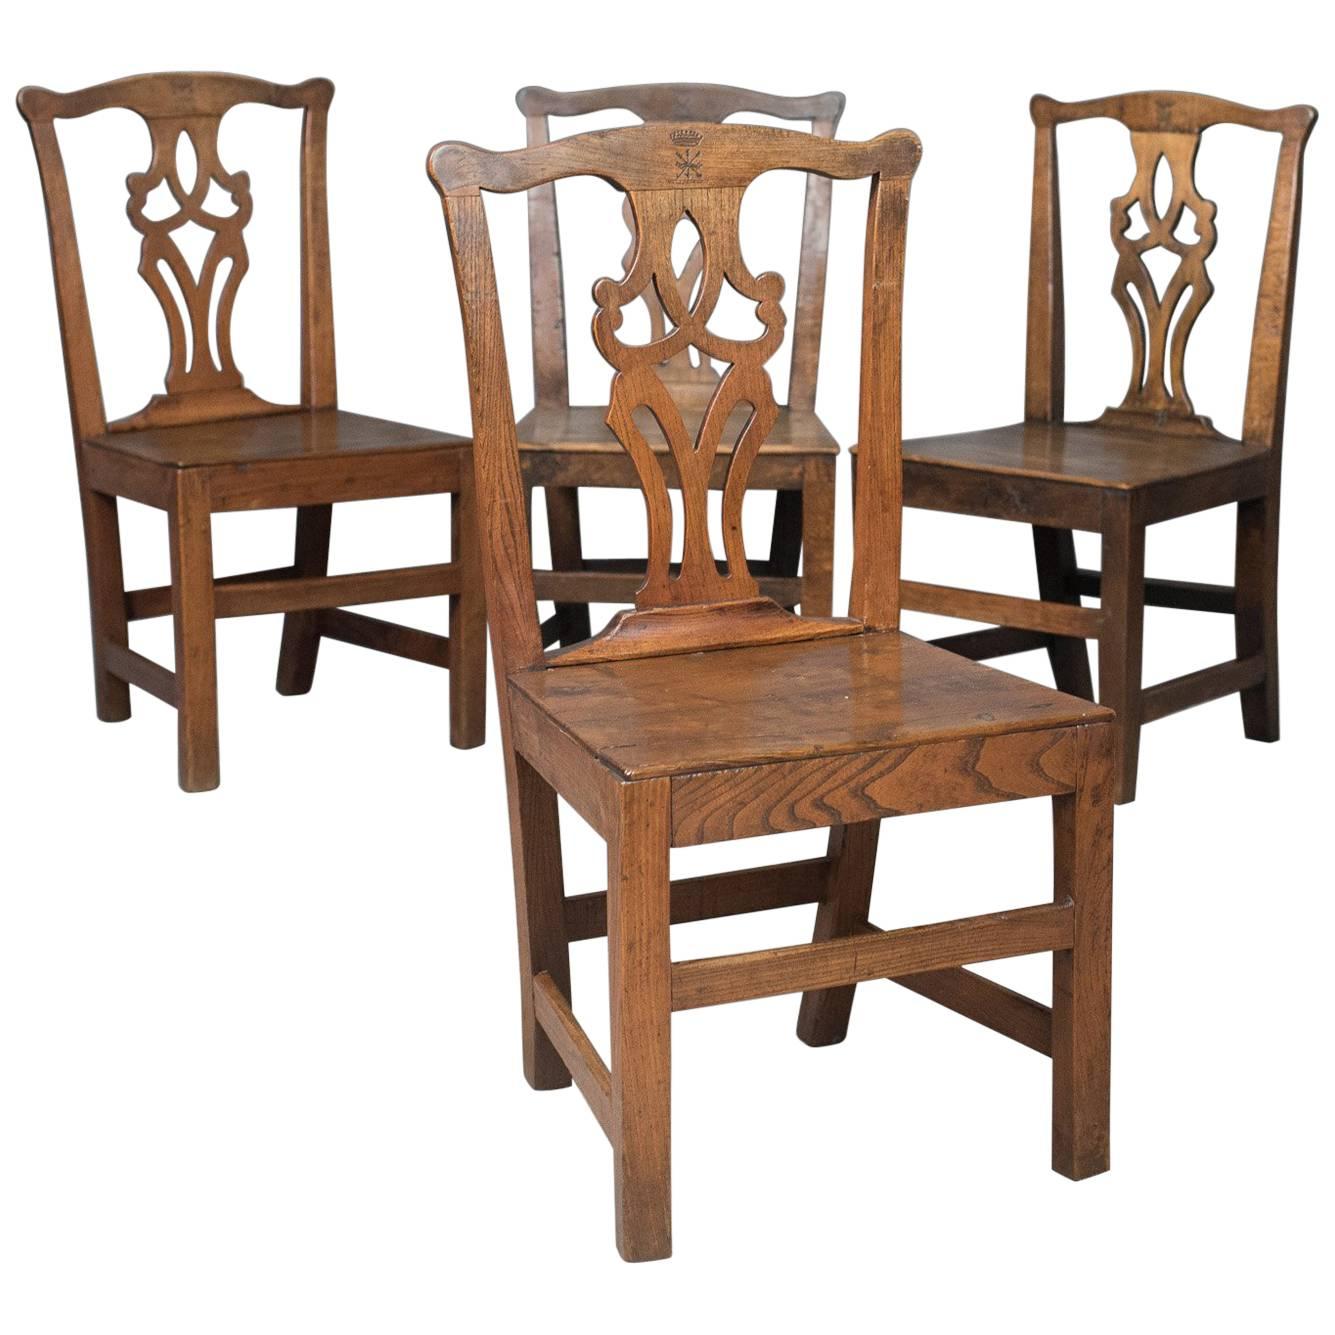 Set of Four Antique Dining Chairs, Oak and Elm, English, Country Kitchen